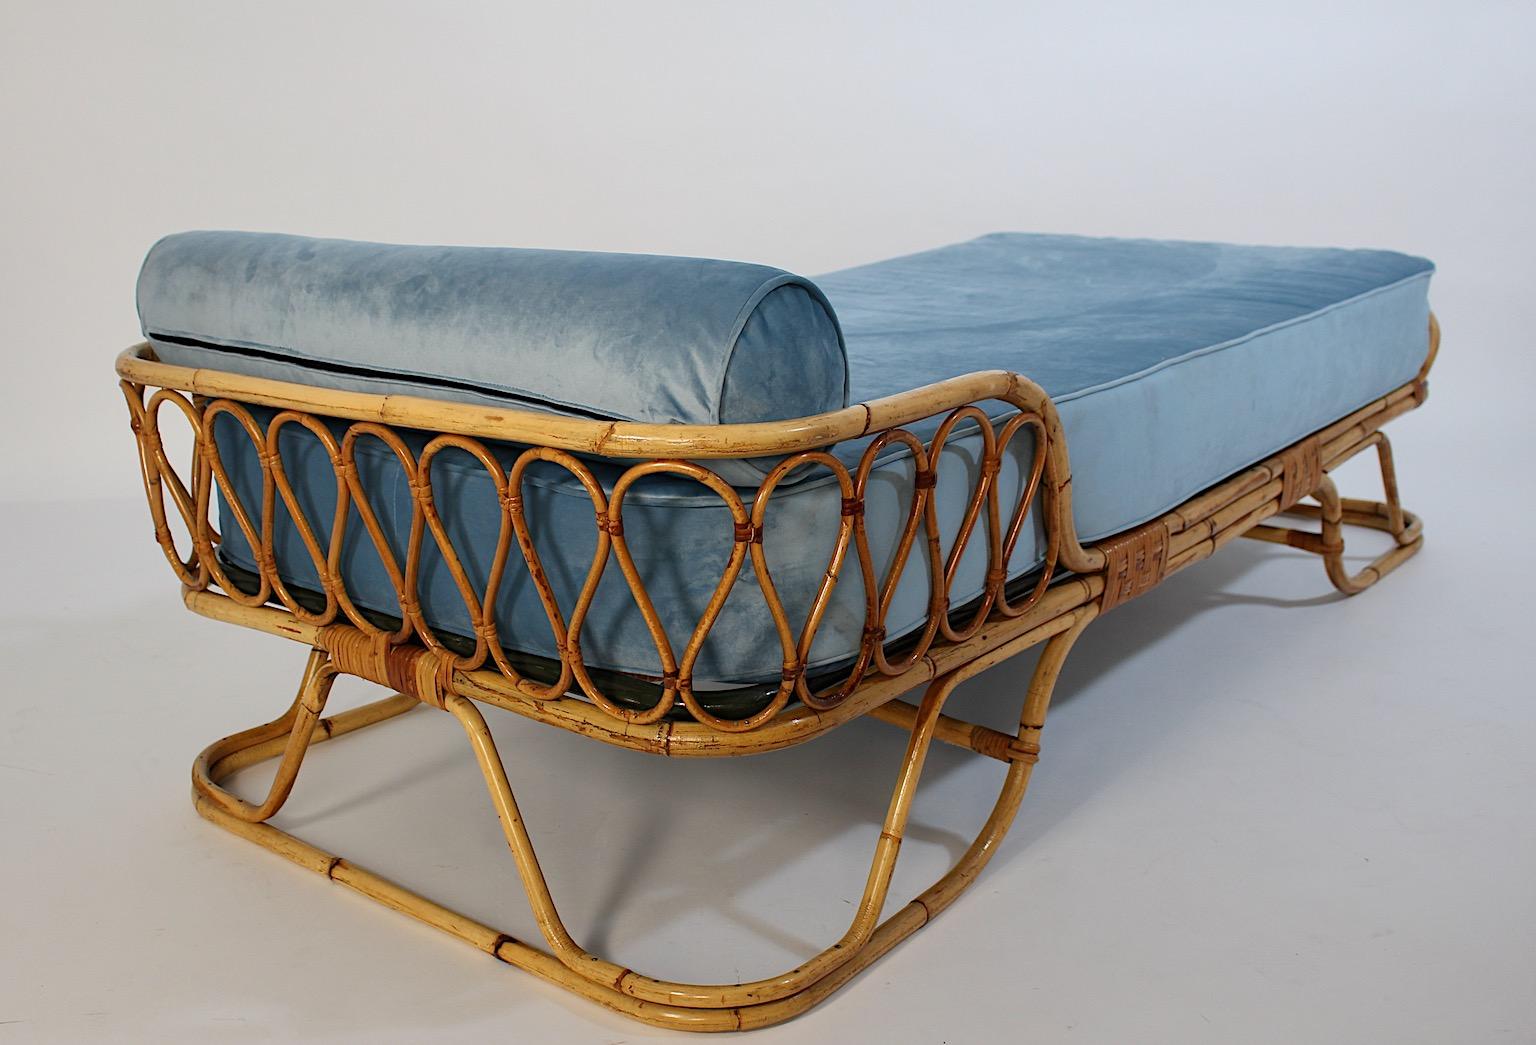 Mid-Century Modern vintage organic single daybed or chaise lounge from rattan and bamboo attributed to Gio Ponti 1950s Italy.
A beautiful vintage single daybed from rattan and bamboo with a light blue new mattress and pad roll attributed to Gio